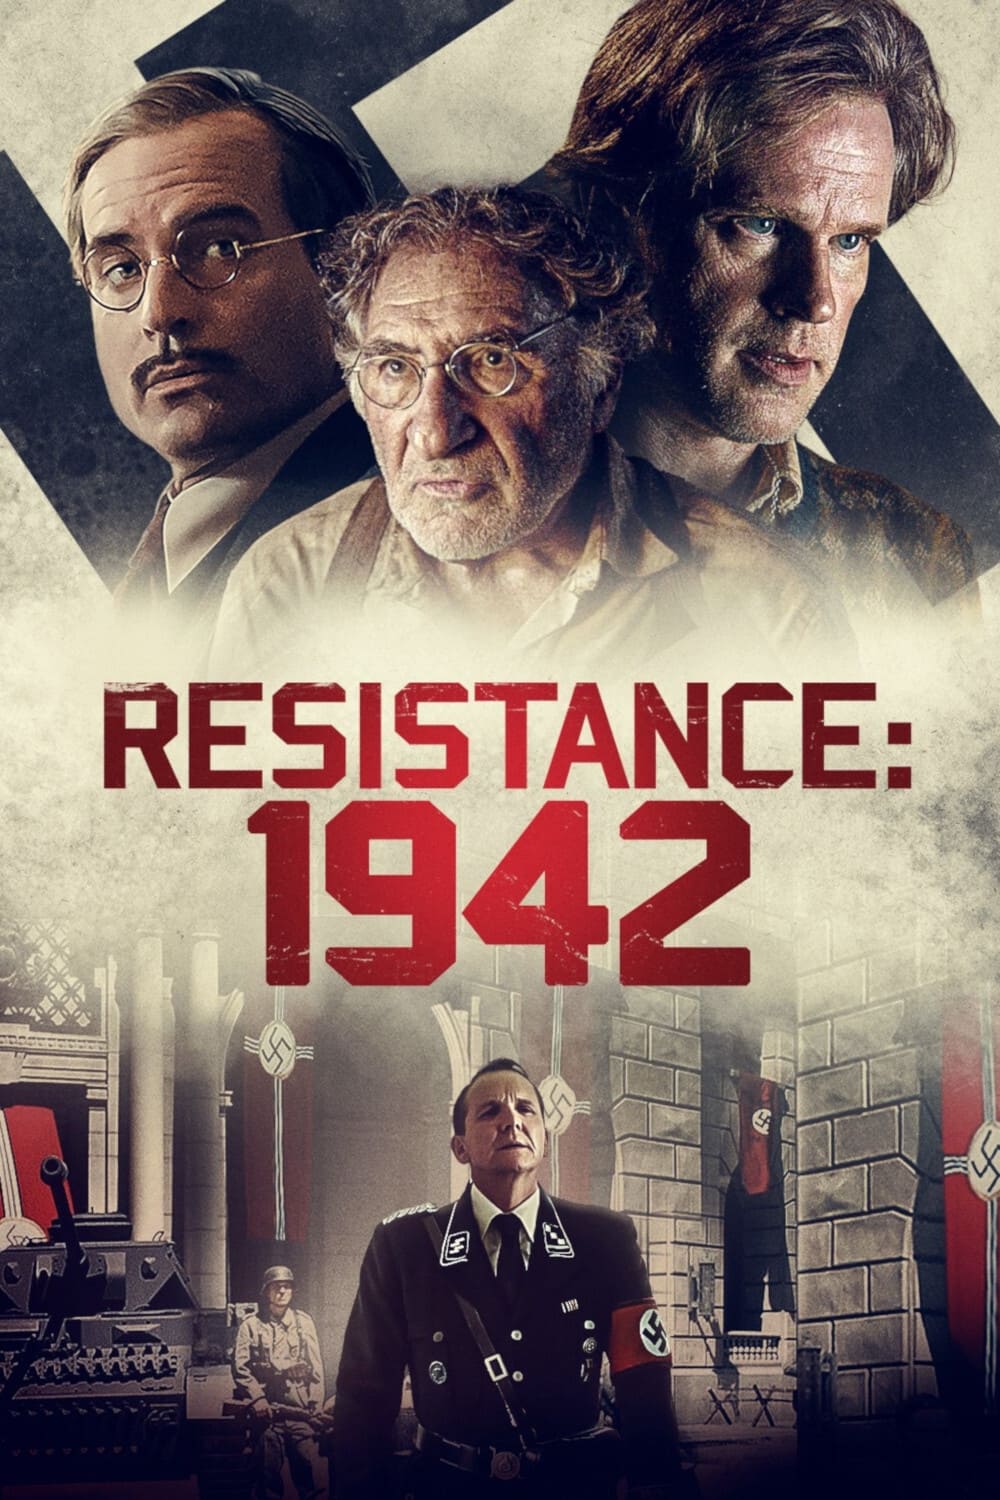 The movie follows a group of resistance radio broadcasters in Nazi-occupied France as they evade capture alongside a Jewish family.